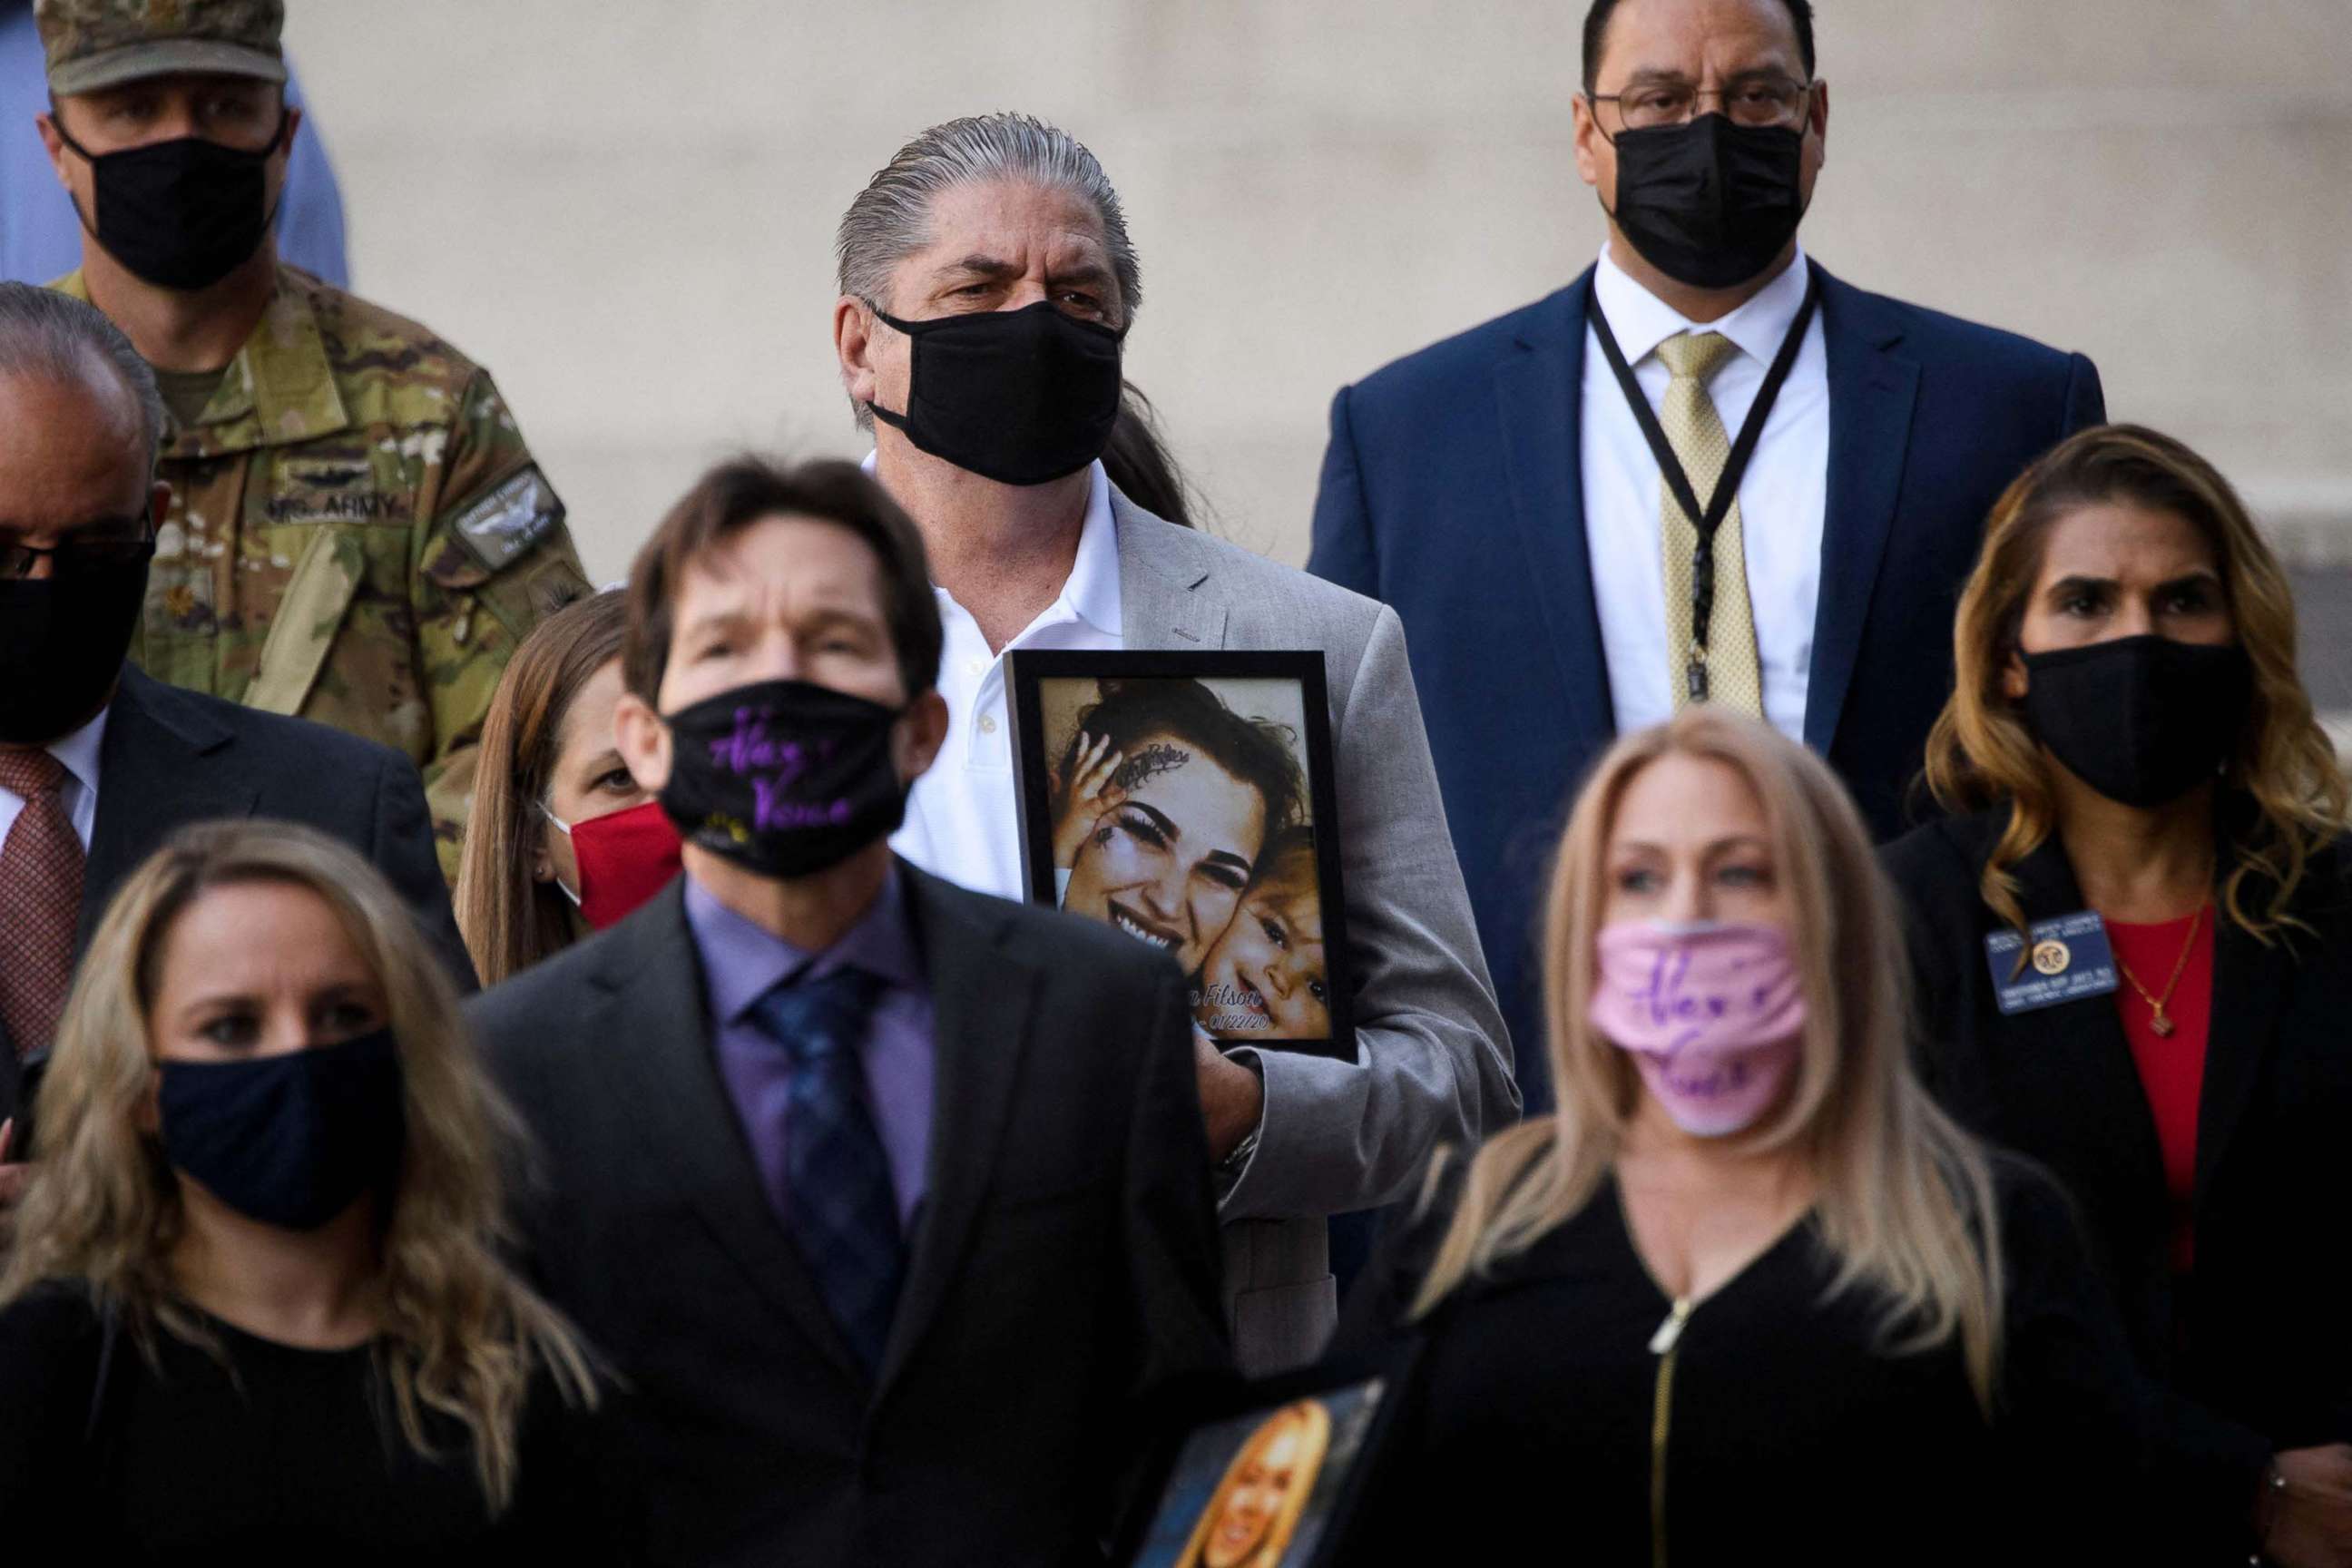 PHOTO: Steve Filson, whose daughter Jessica Filson died in January 2020 of opioids, stands with families who have had relatives die of opioids and authorities during a news conference outside the Roybal Federal Building, Feb. 24, 2021, in Los Angeles.